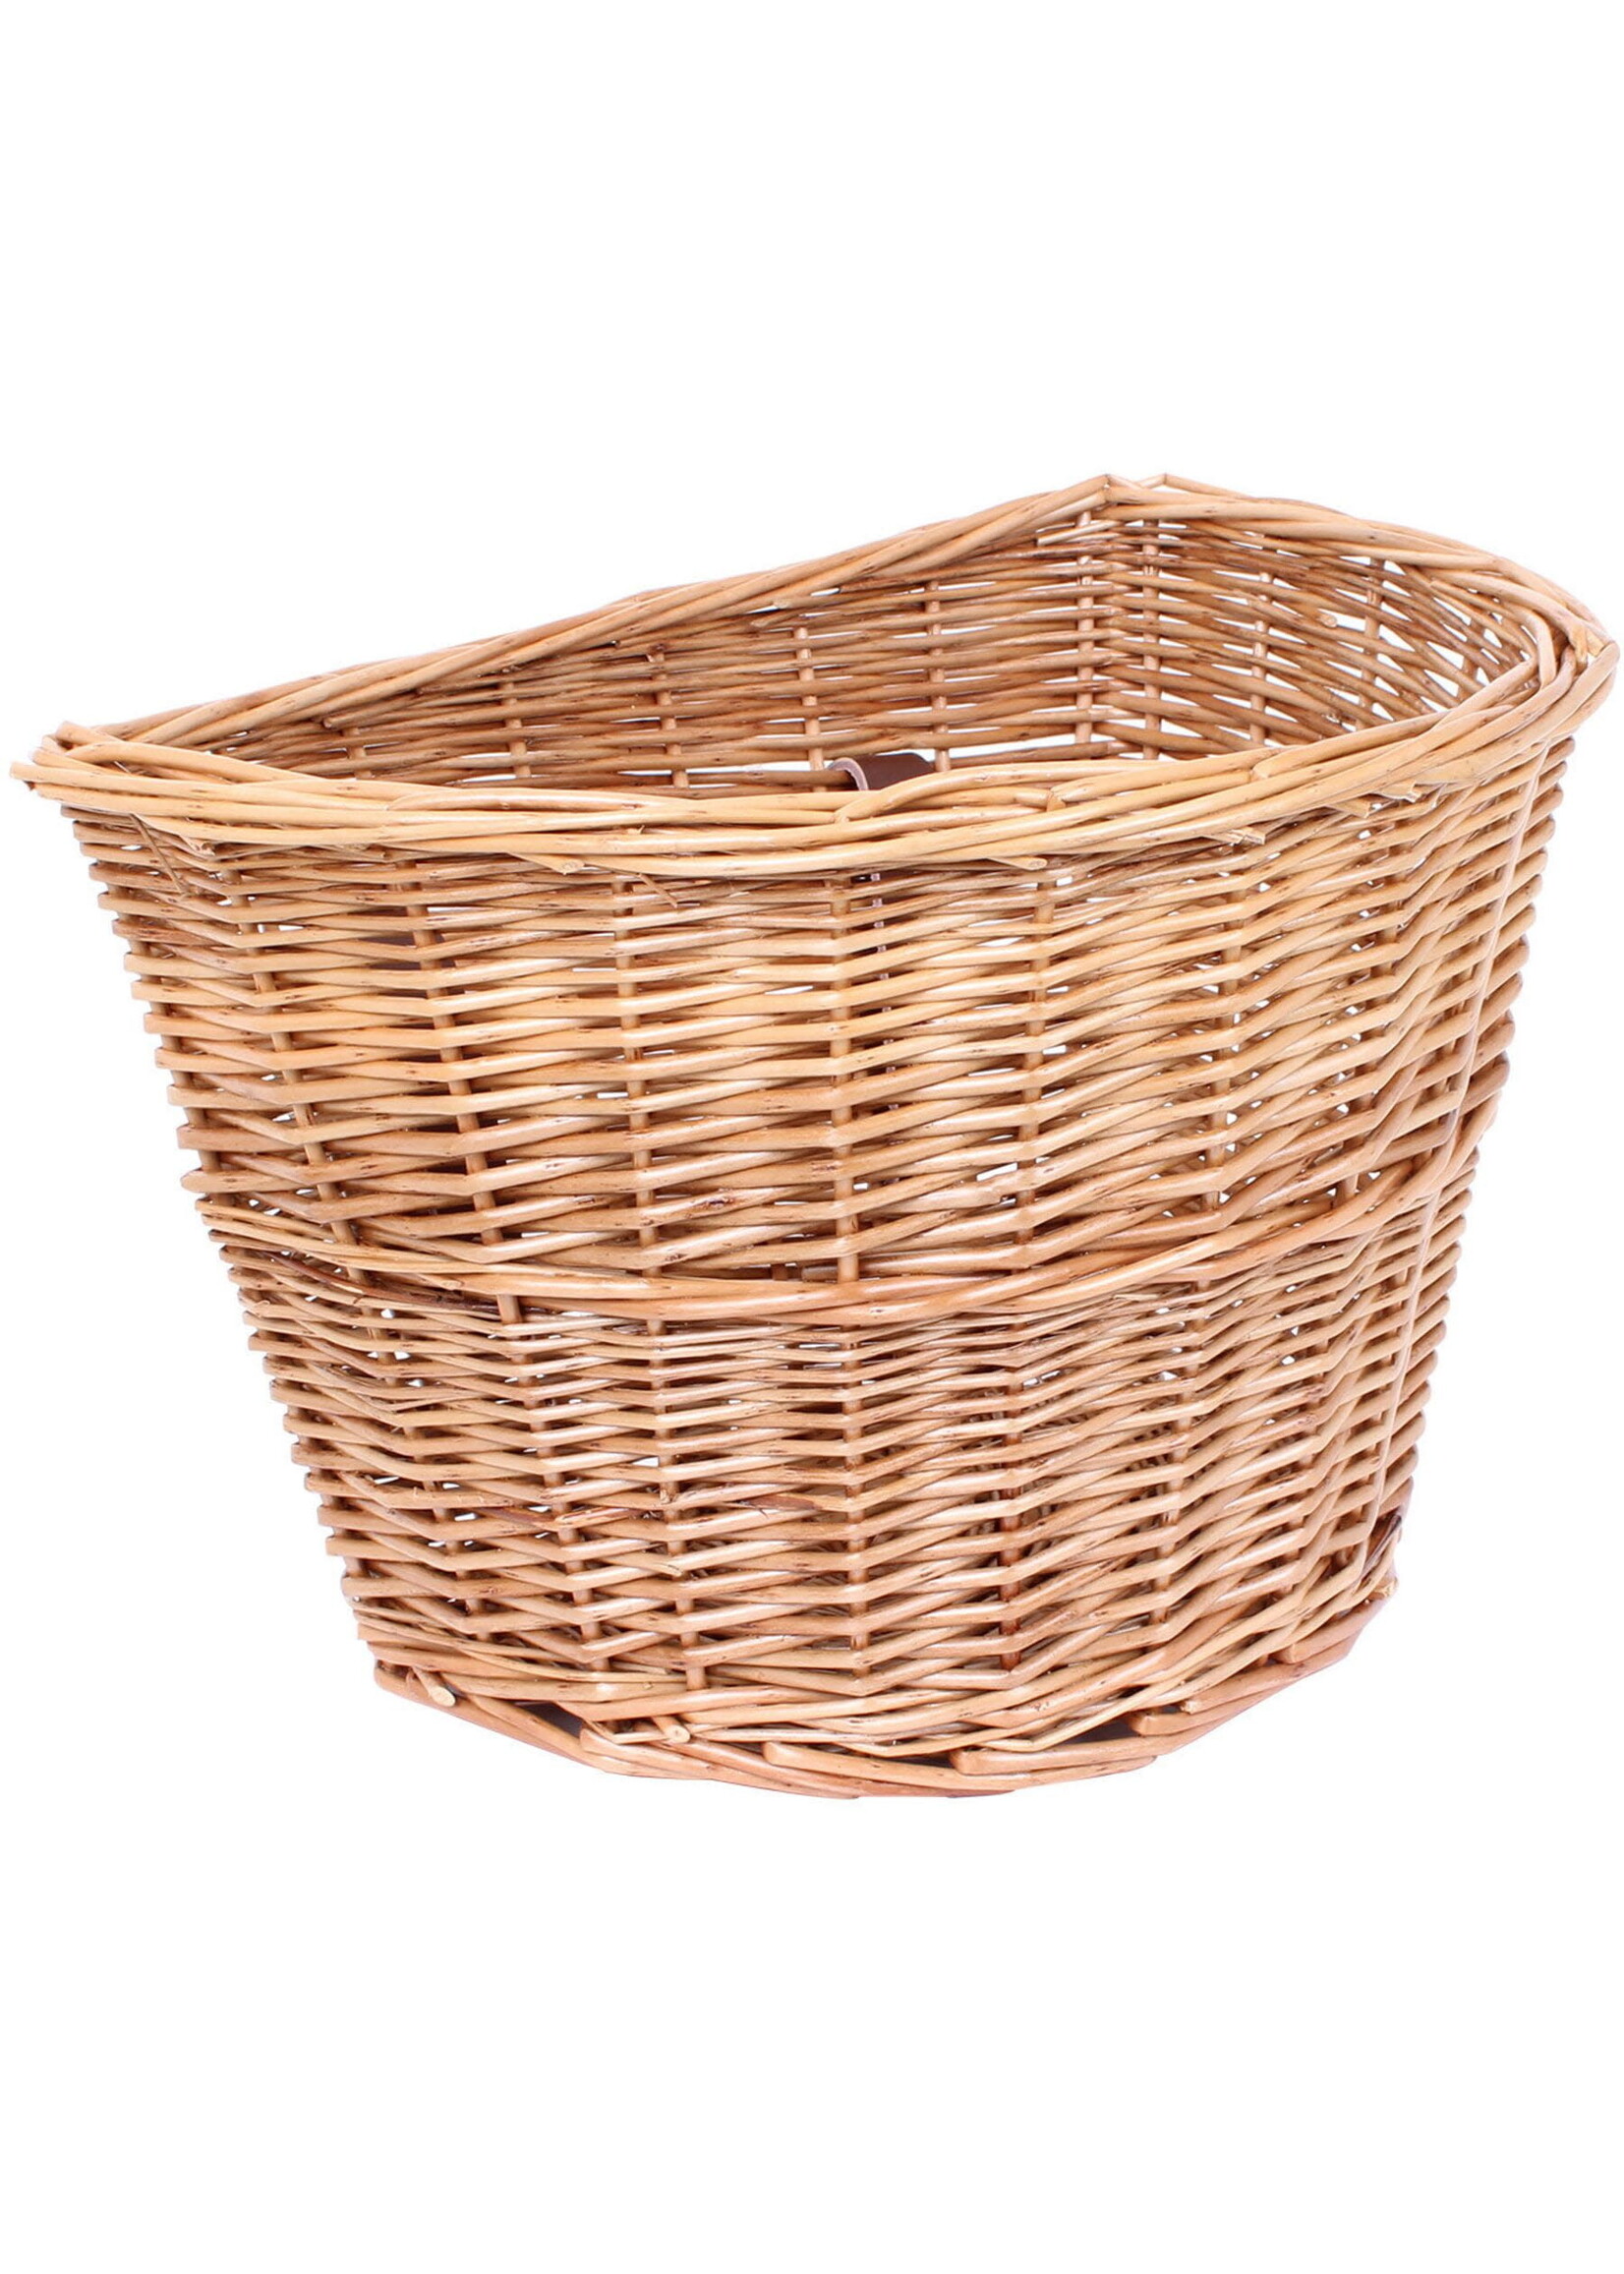 M:Part D Shaped wicker basket with leather straps